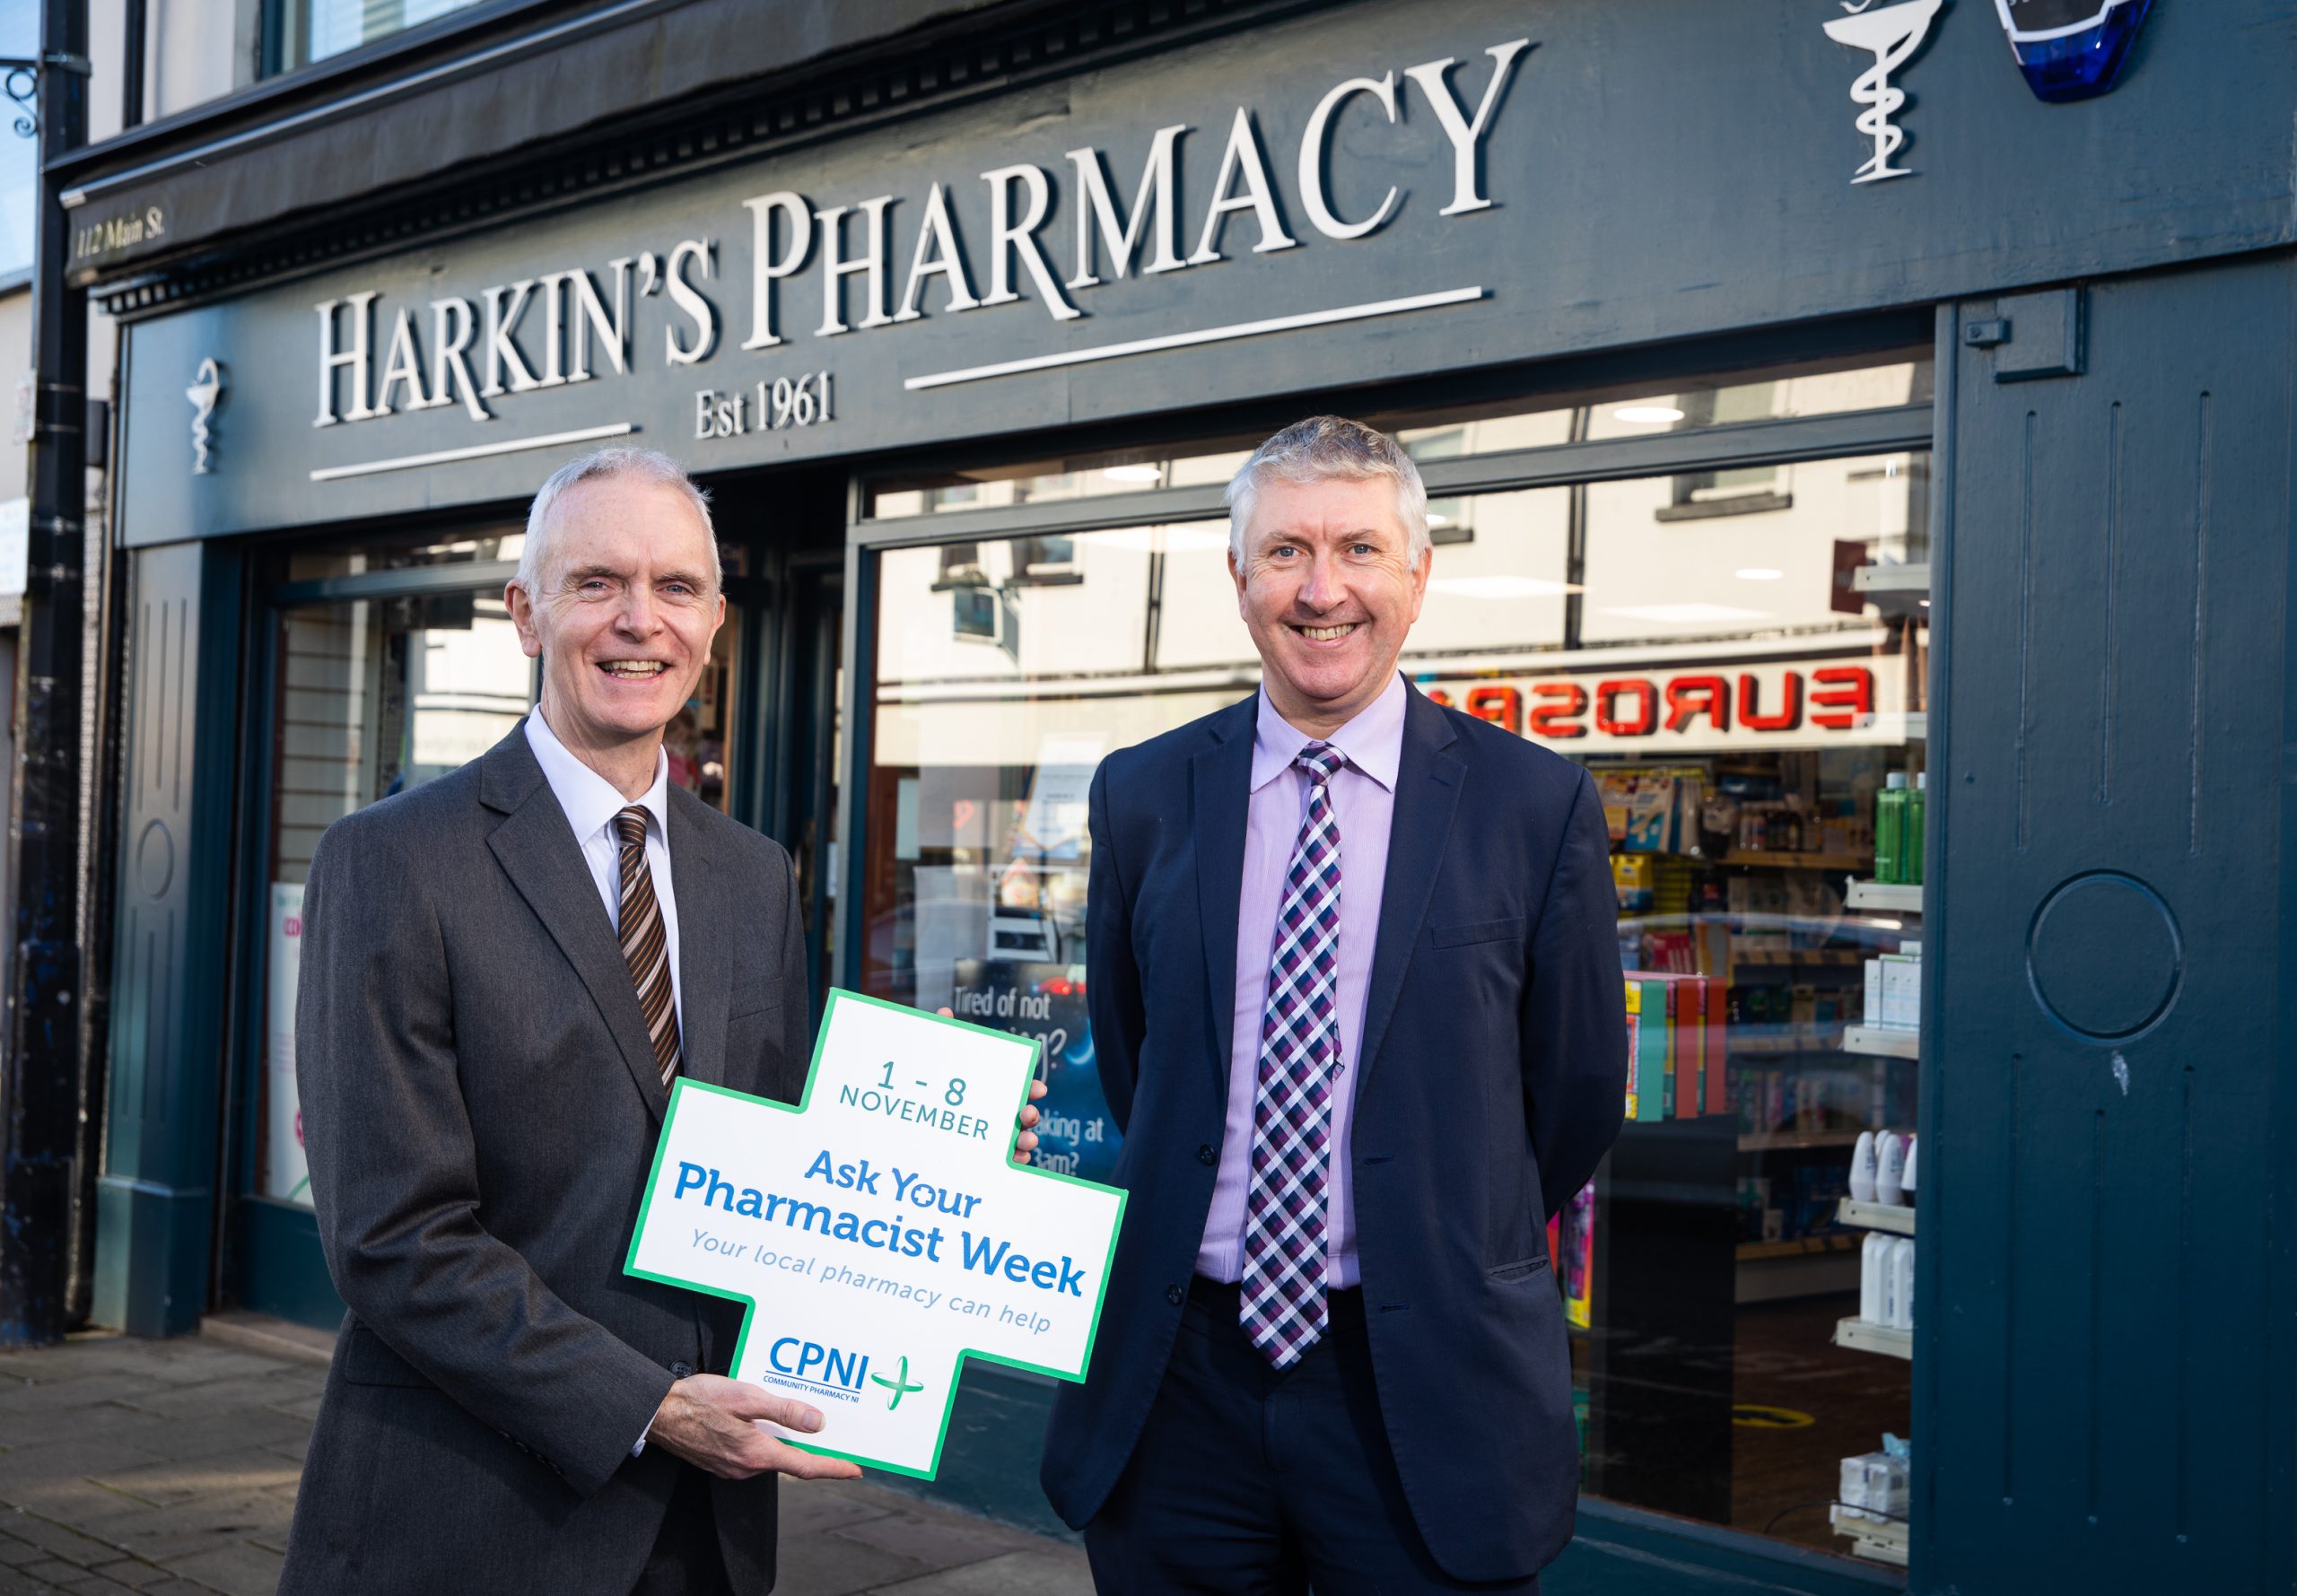 Public encouraged to ‘Ask Your Pharmacist’ about services during awareness week